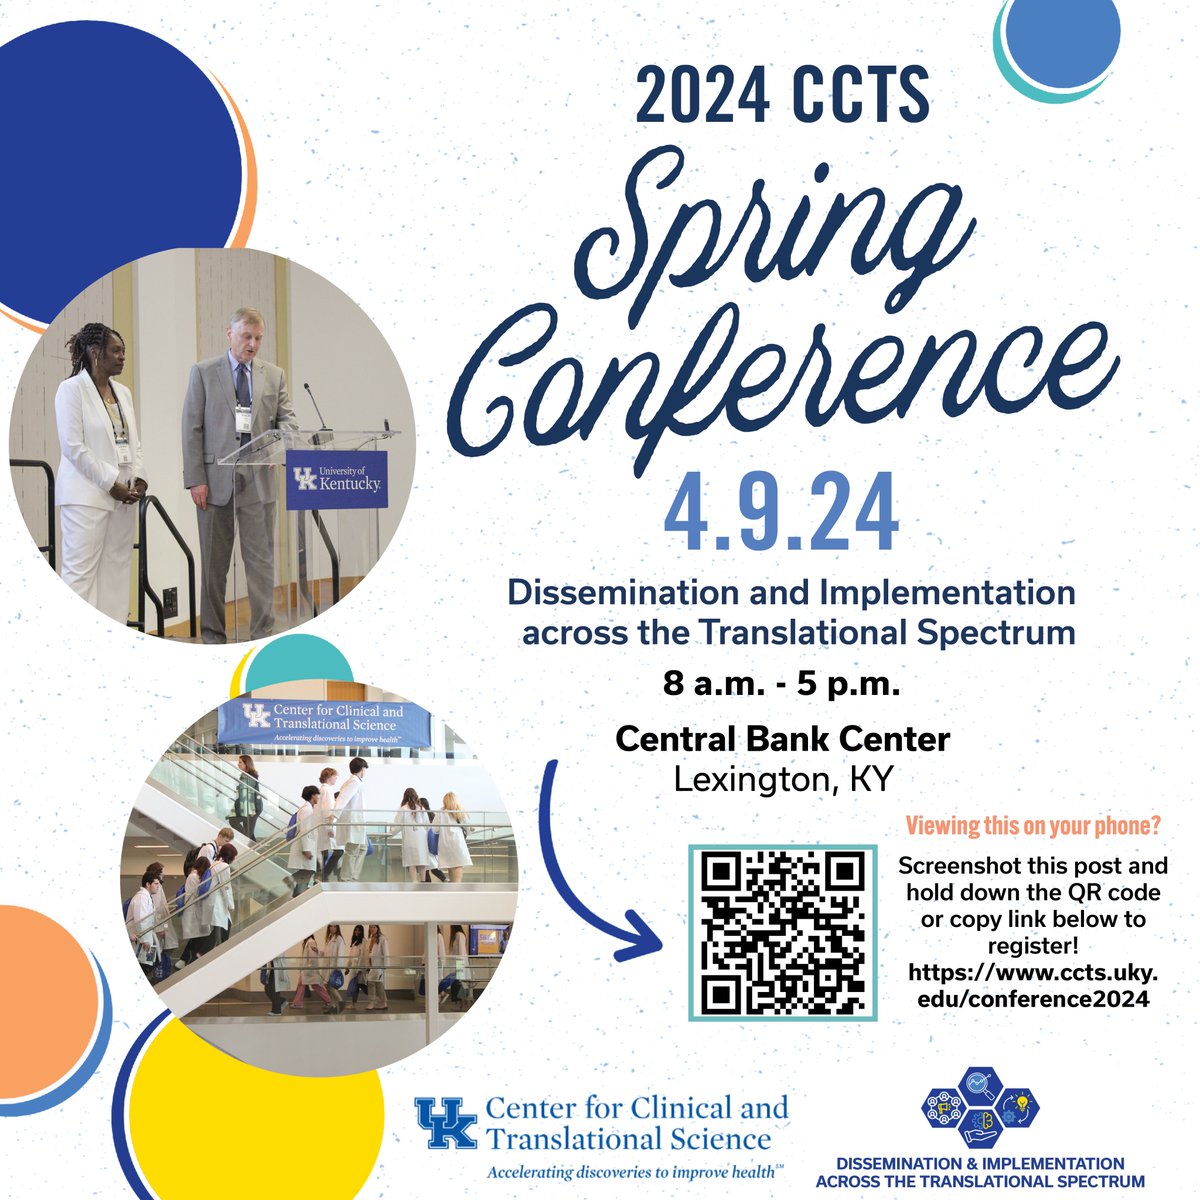 TODAY is the 19th Annual CCTS 2024 Spring Conference: 'Dissemination and Implementation Across the Translational Spectrum' at the Central Bank Center on Tuesday, April 9th! 🔗 Learn more: ccts.uky.edu/conference2024